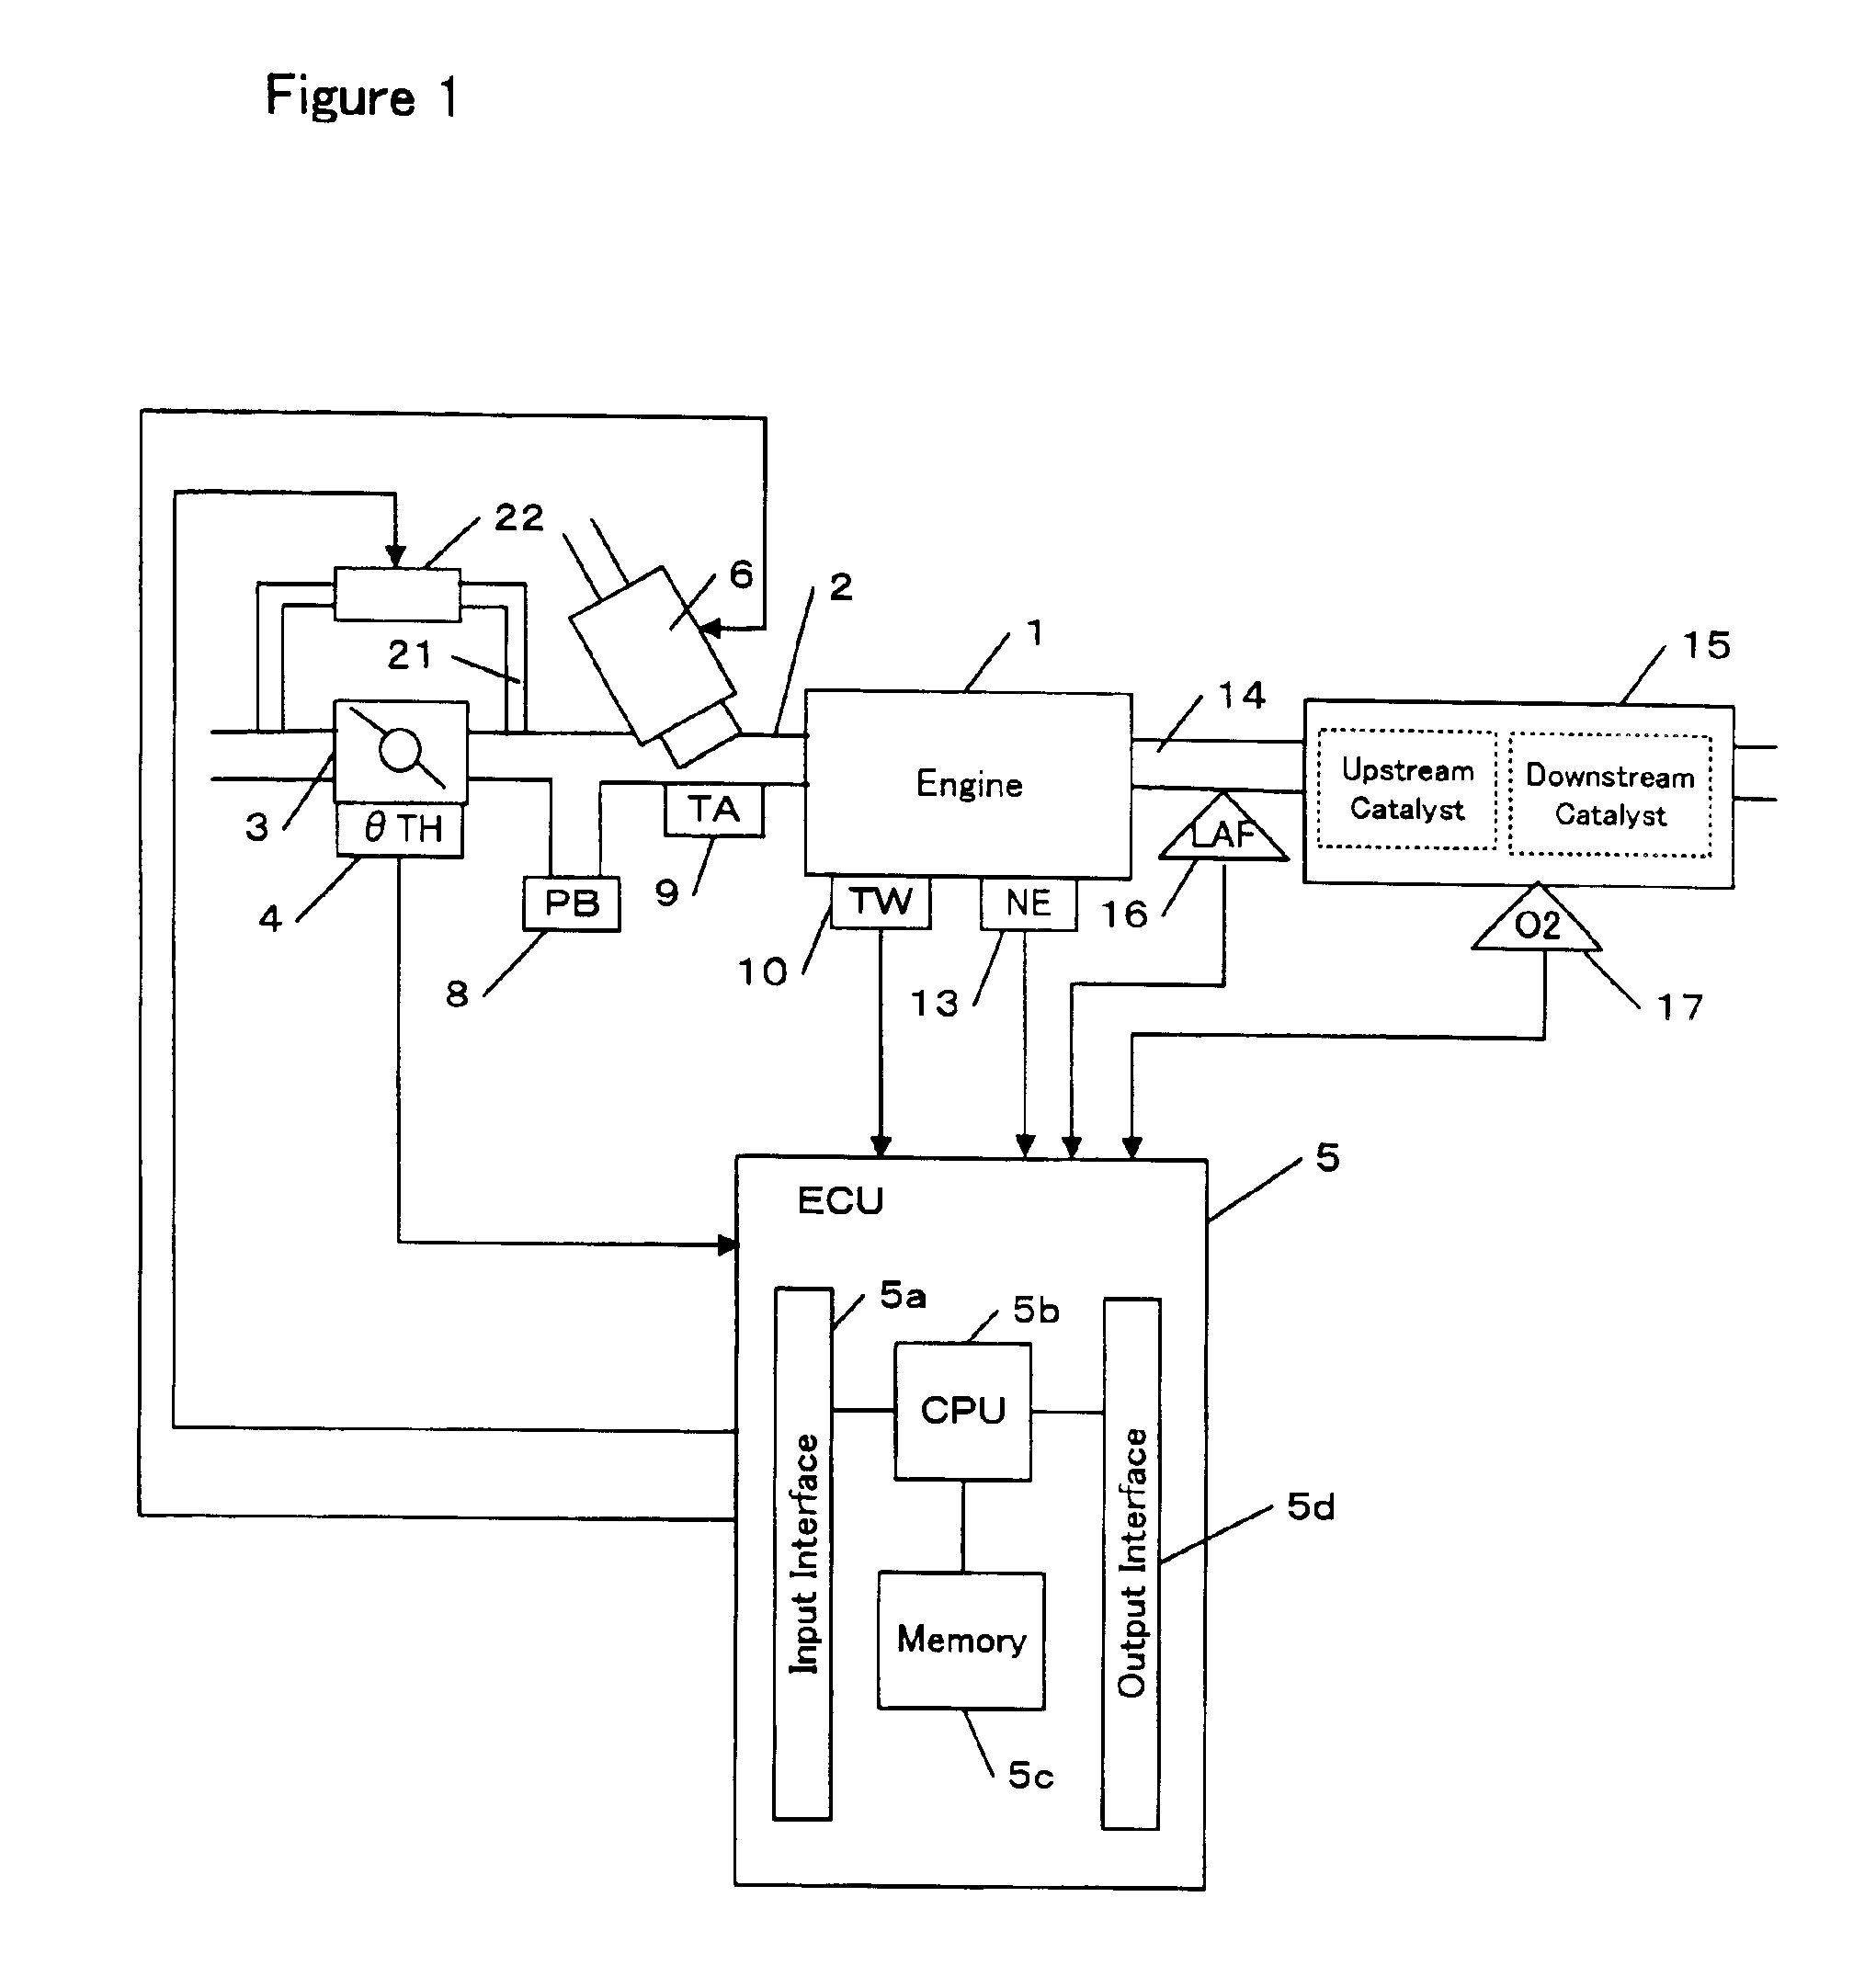 Vehicle controller for controlling an air-fuel ratio